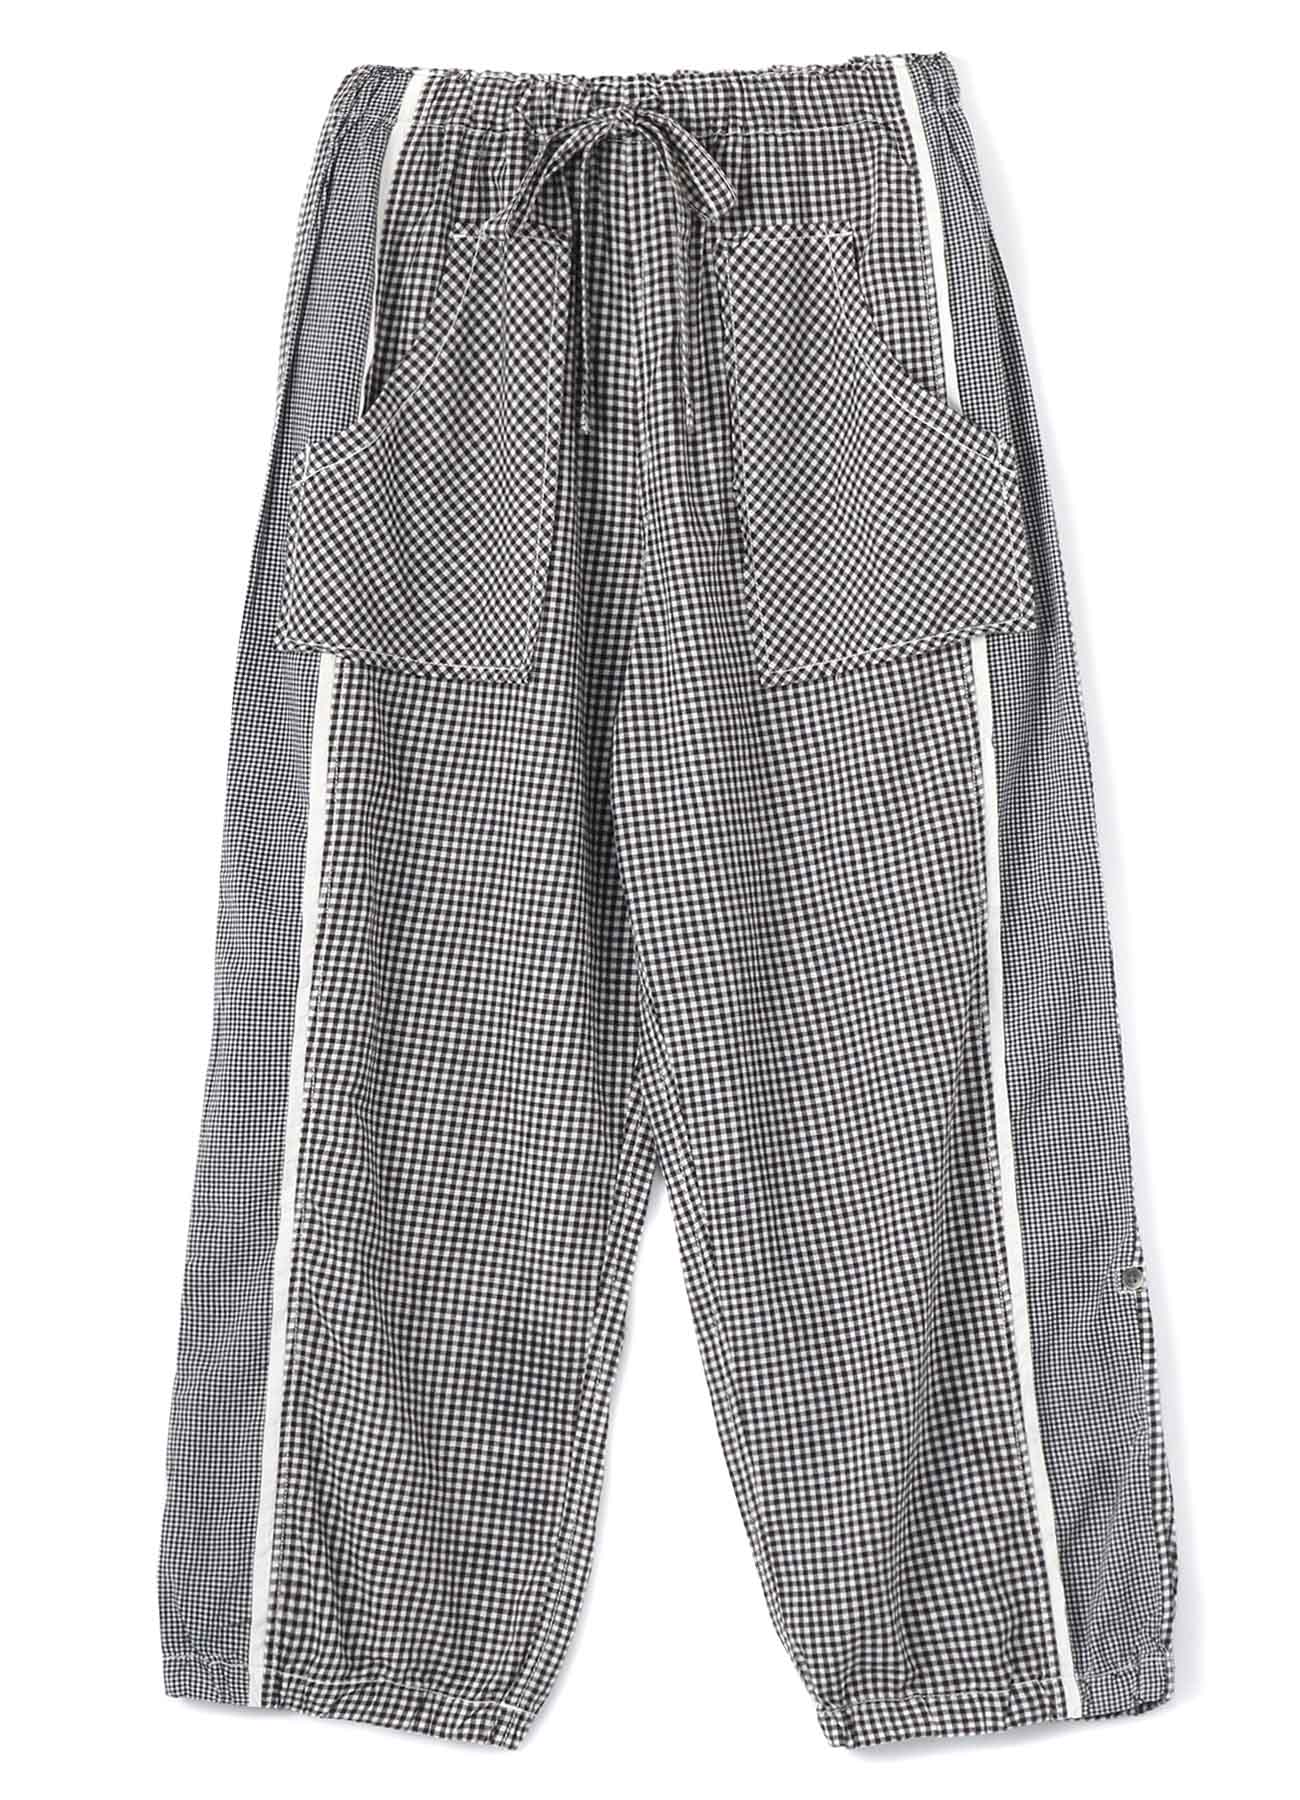 GINGHAM CHECK & COTTON VOILE ROLL UP PANTS